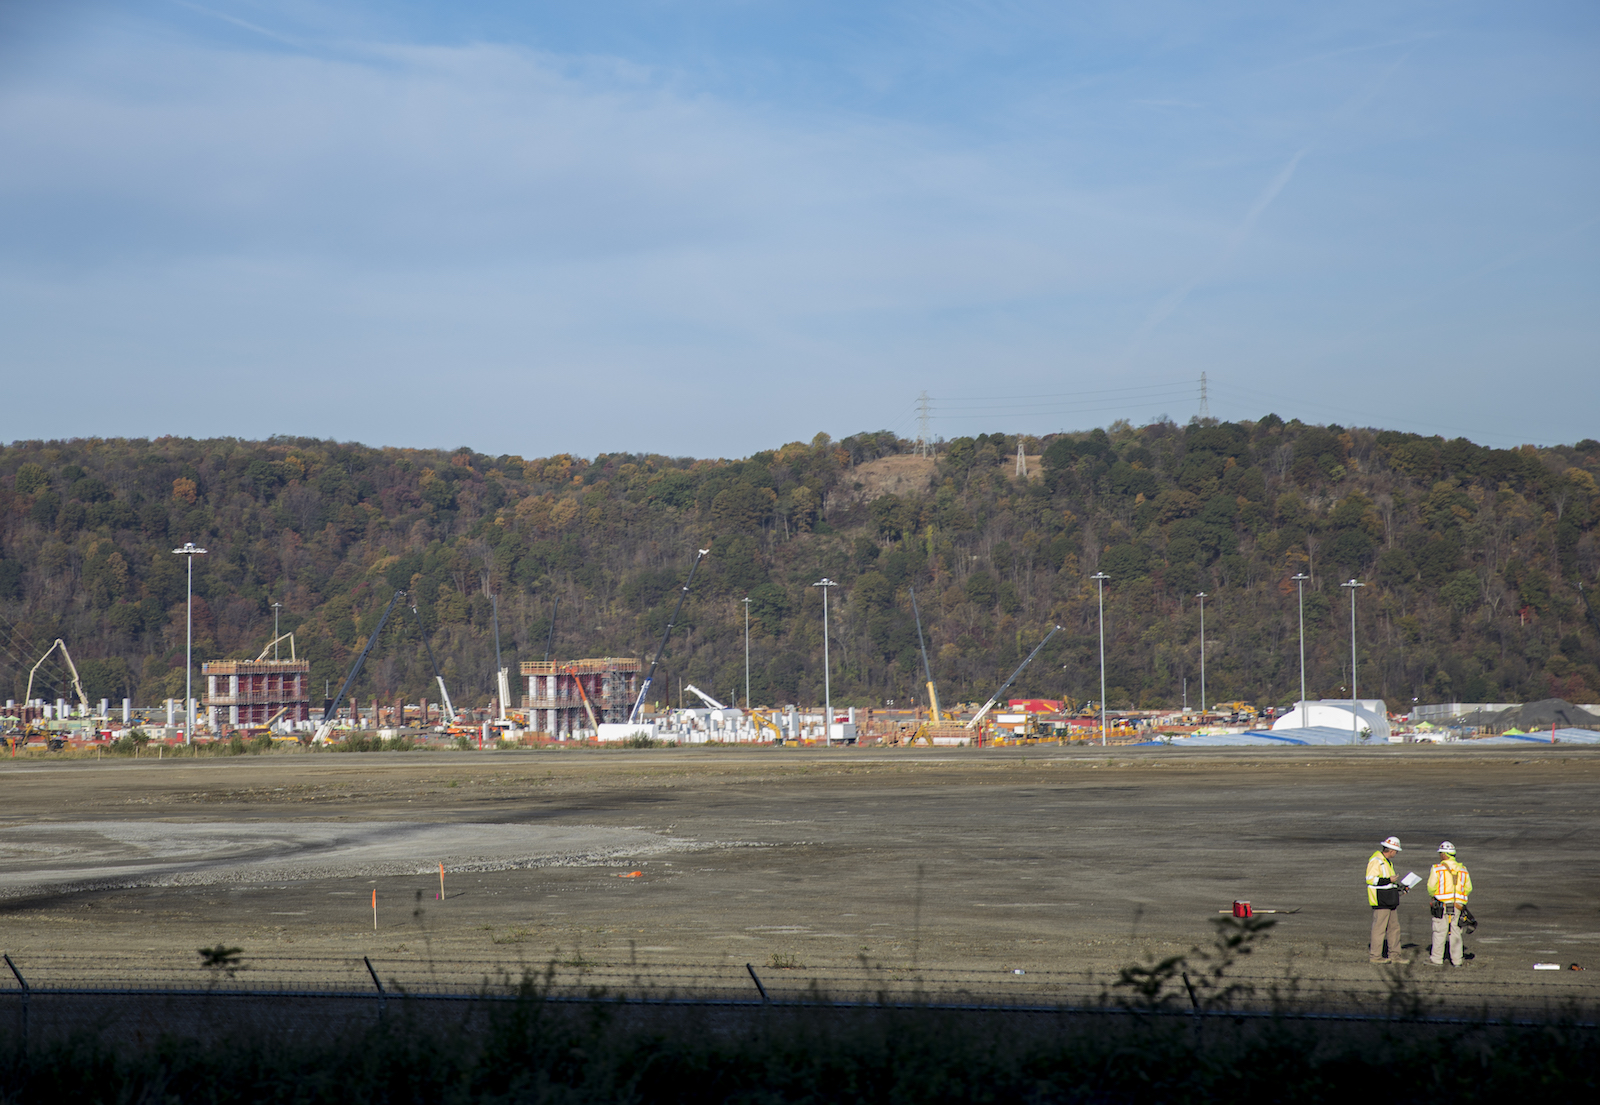 A view of Shell Chemical's new multi billion-dollar ethane cracker plant processing plant across the Allegheny River can be seen under construction October 27, 2017 in Monaca, Pennsylvania.